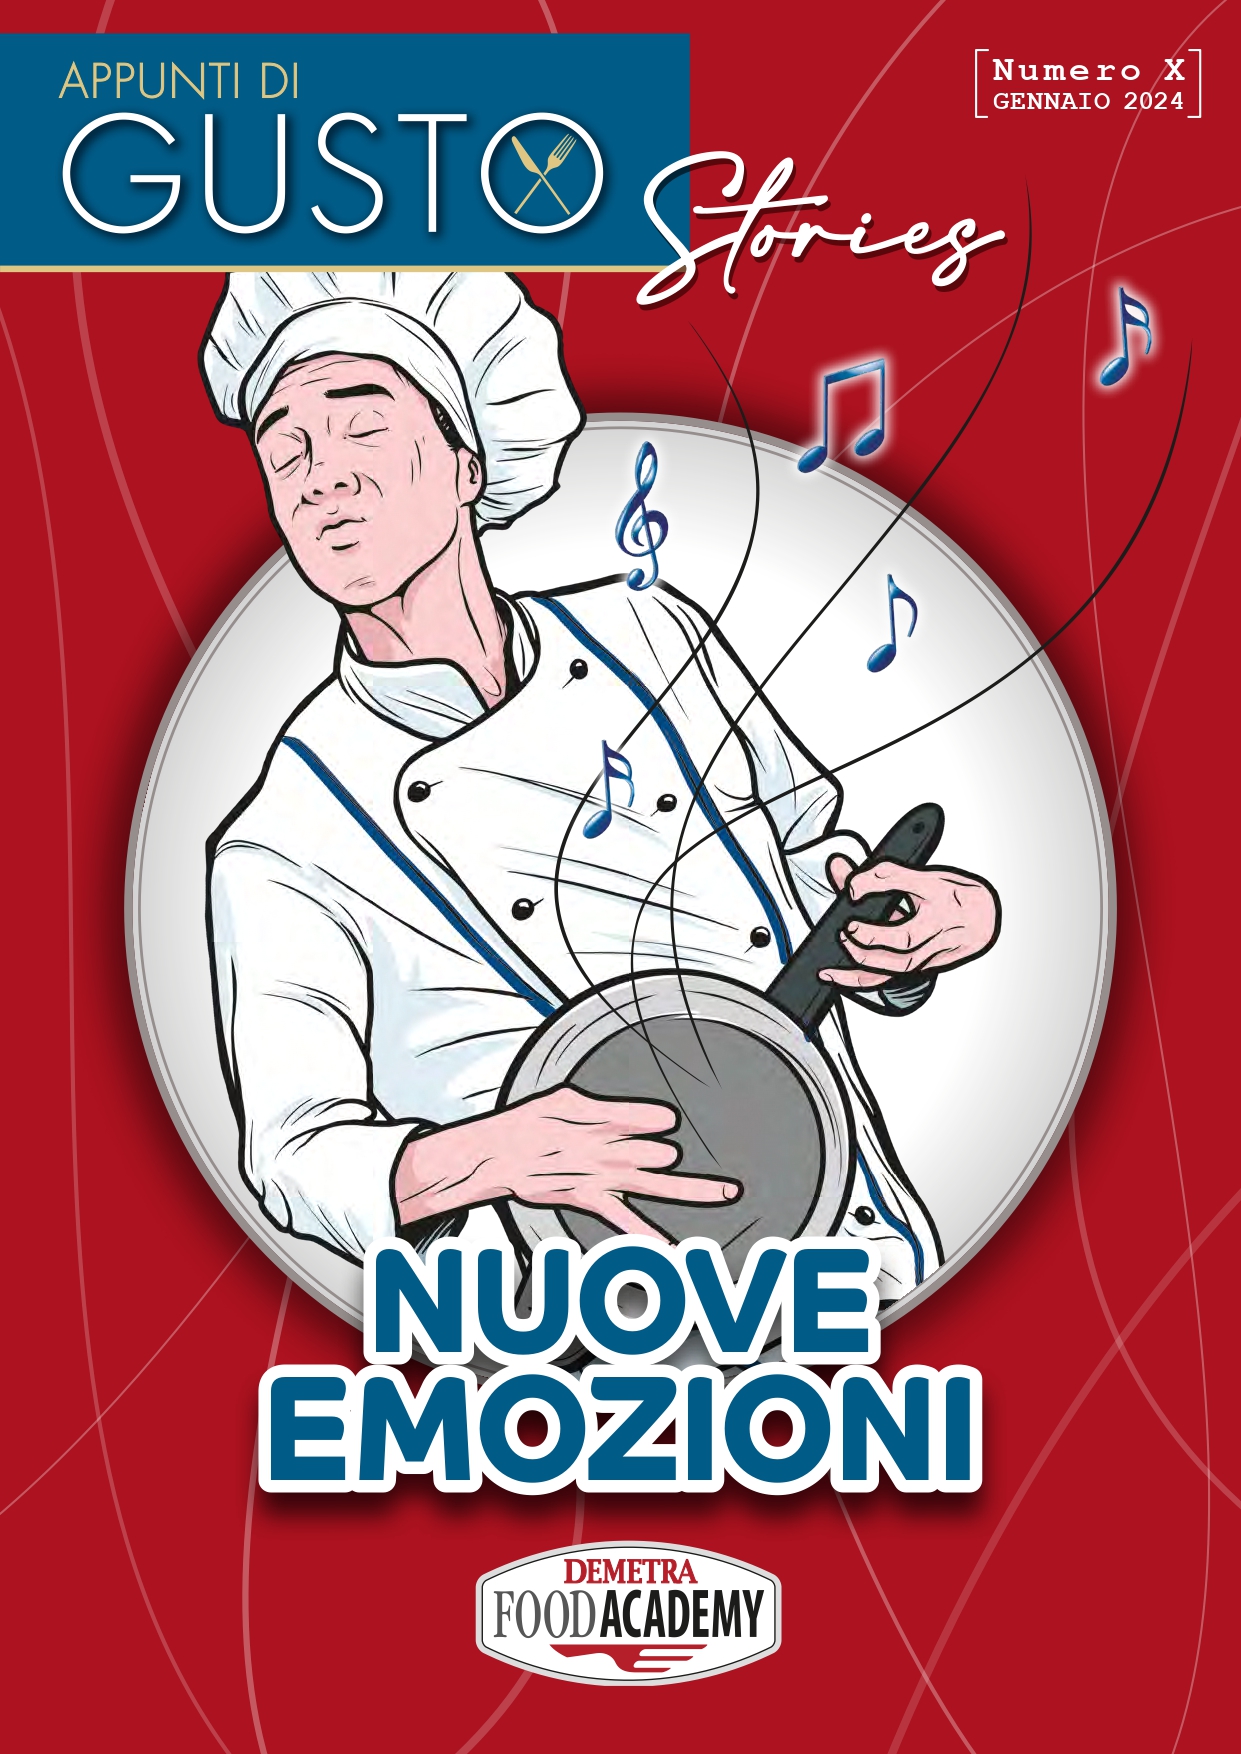 Appunti di Gusto Stories X Nouvelles Emotions 2024